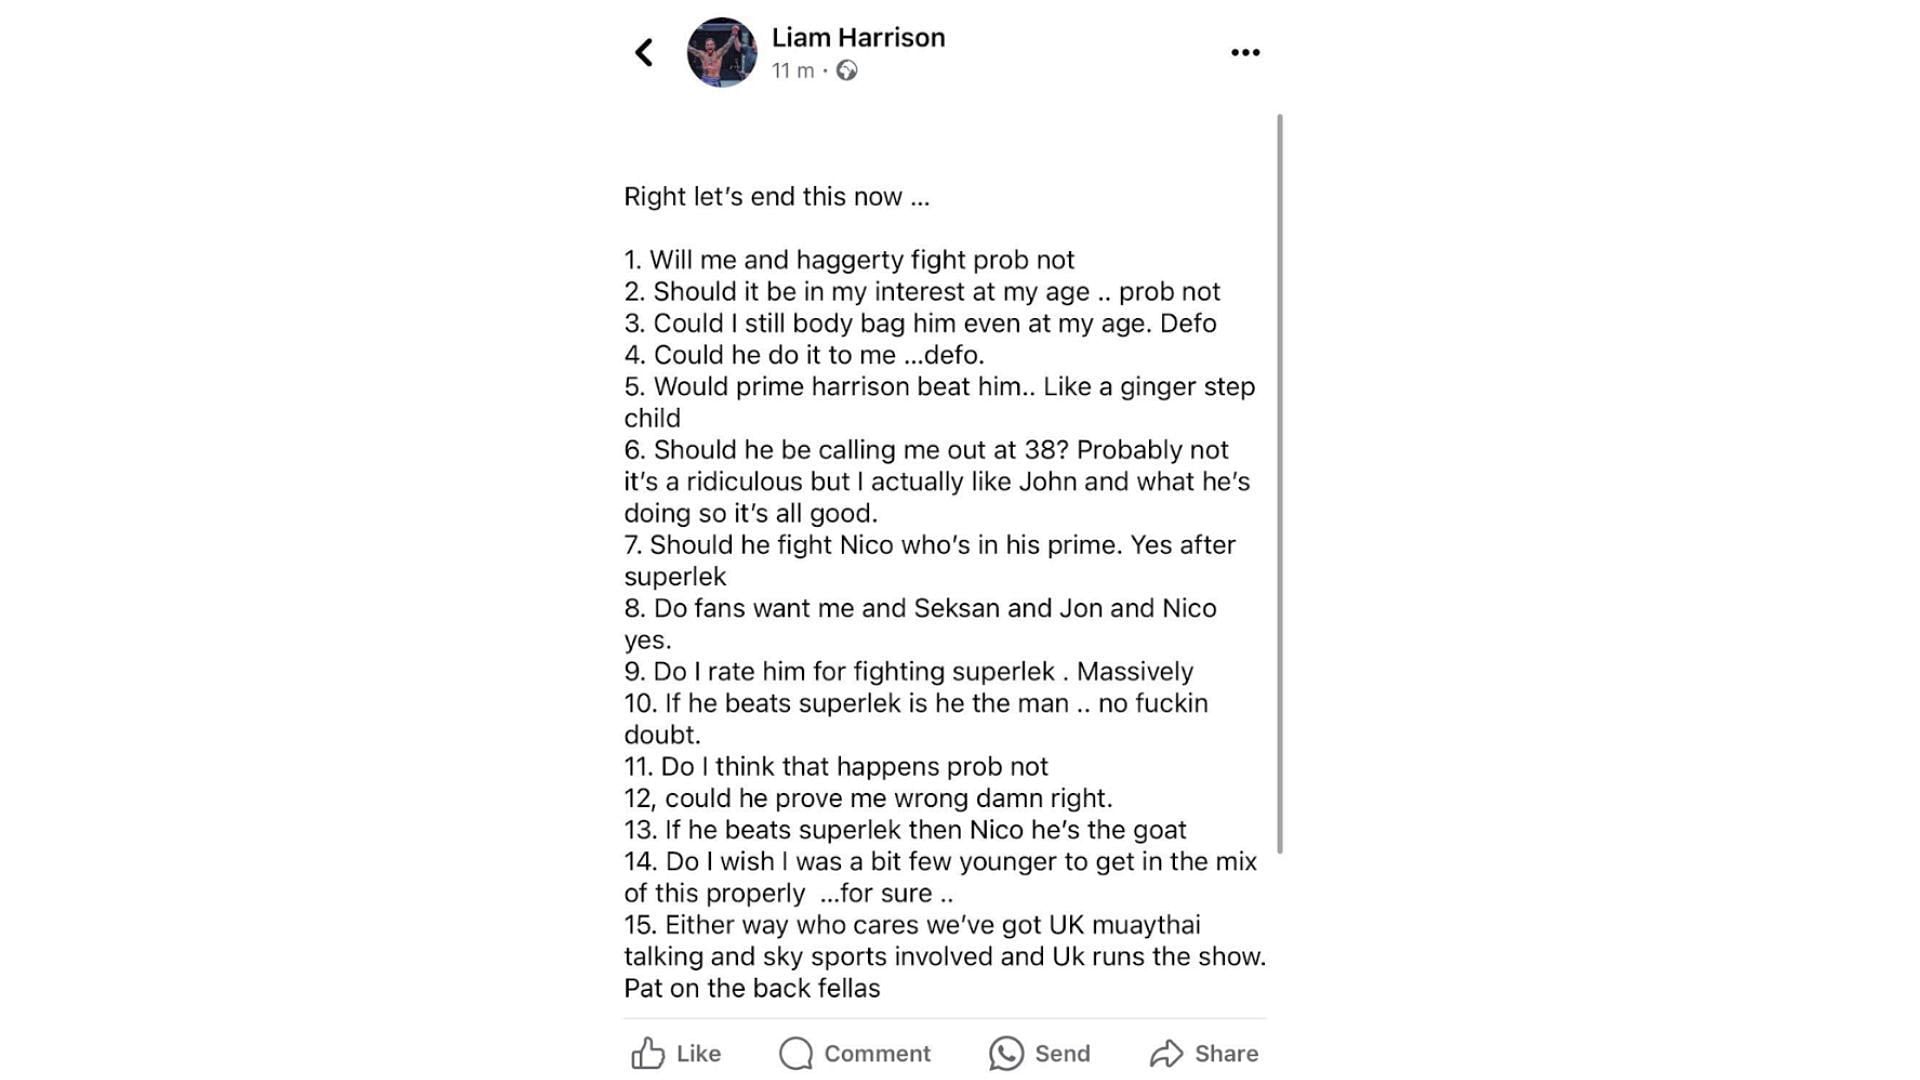 Liam Harrison answers the most popular fan questions above